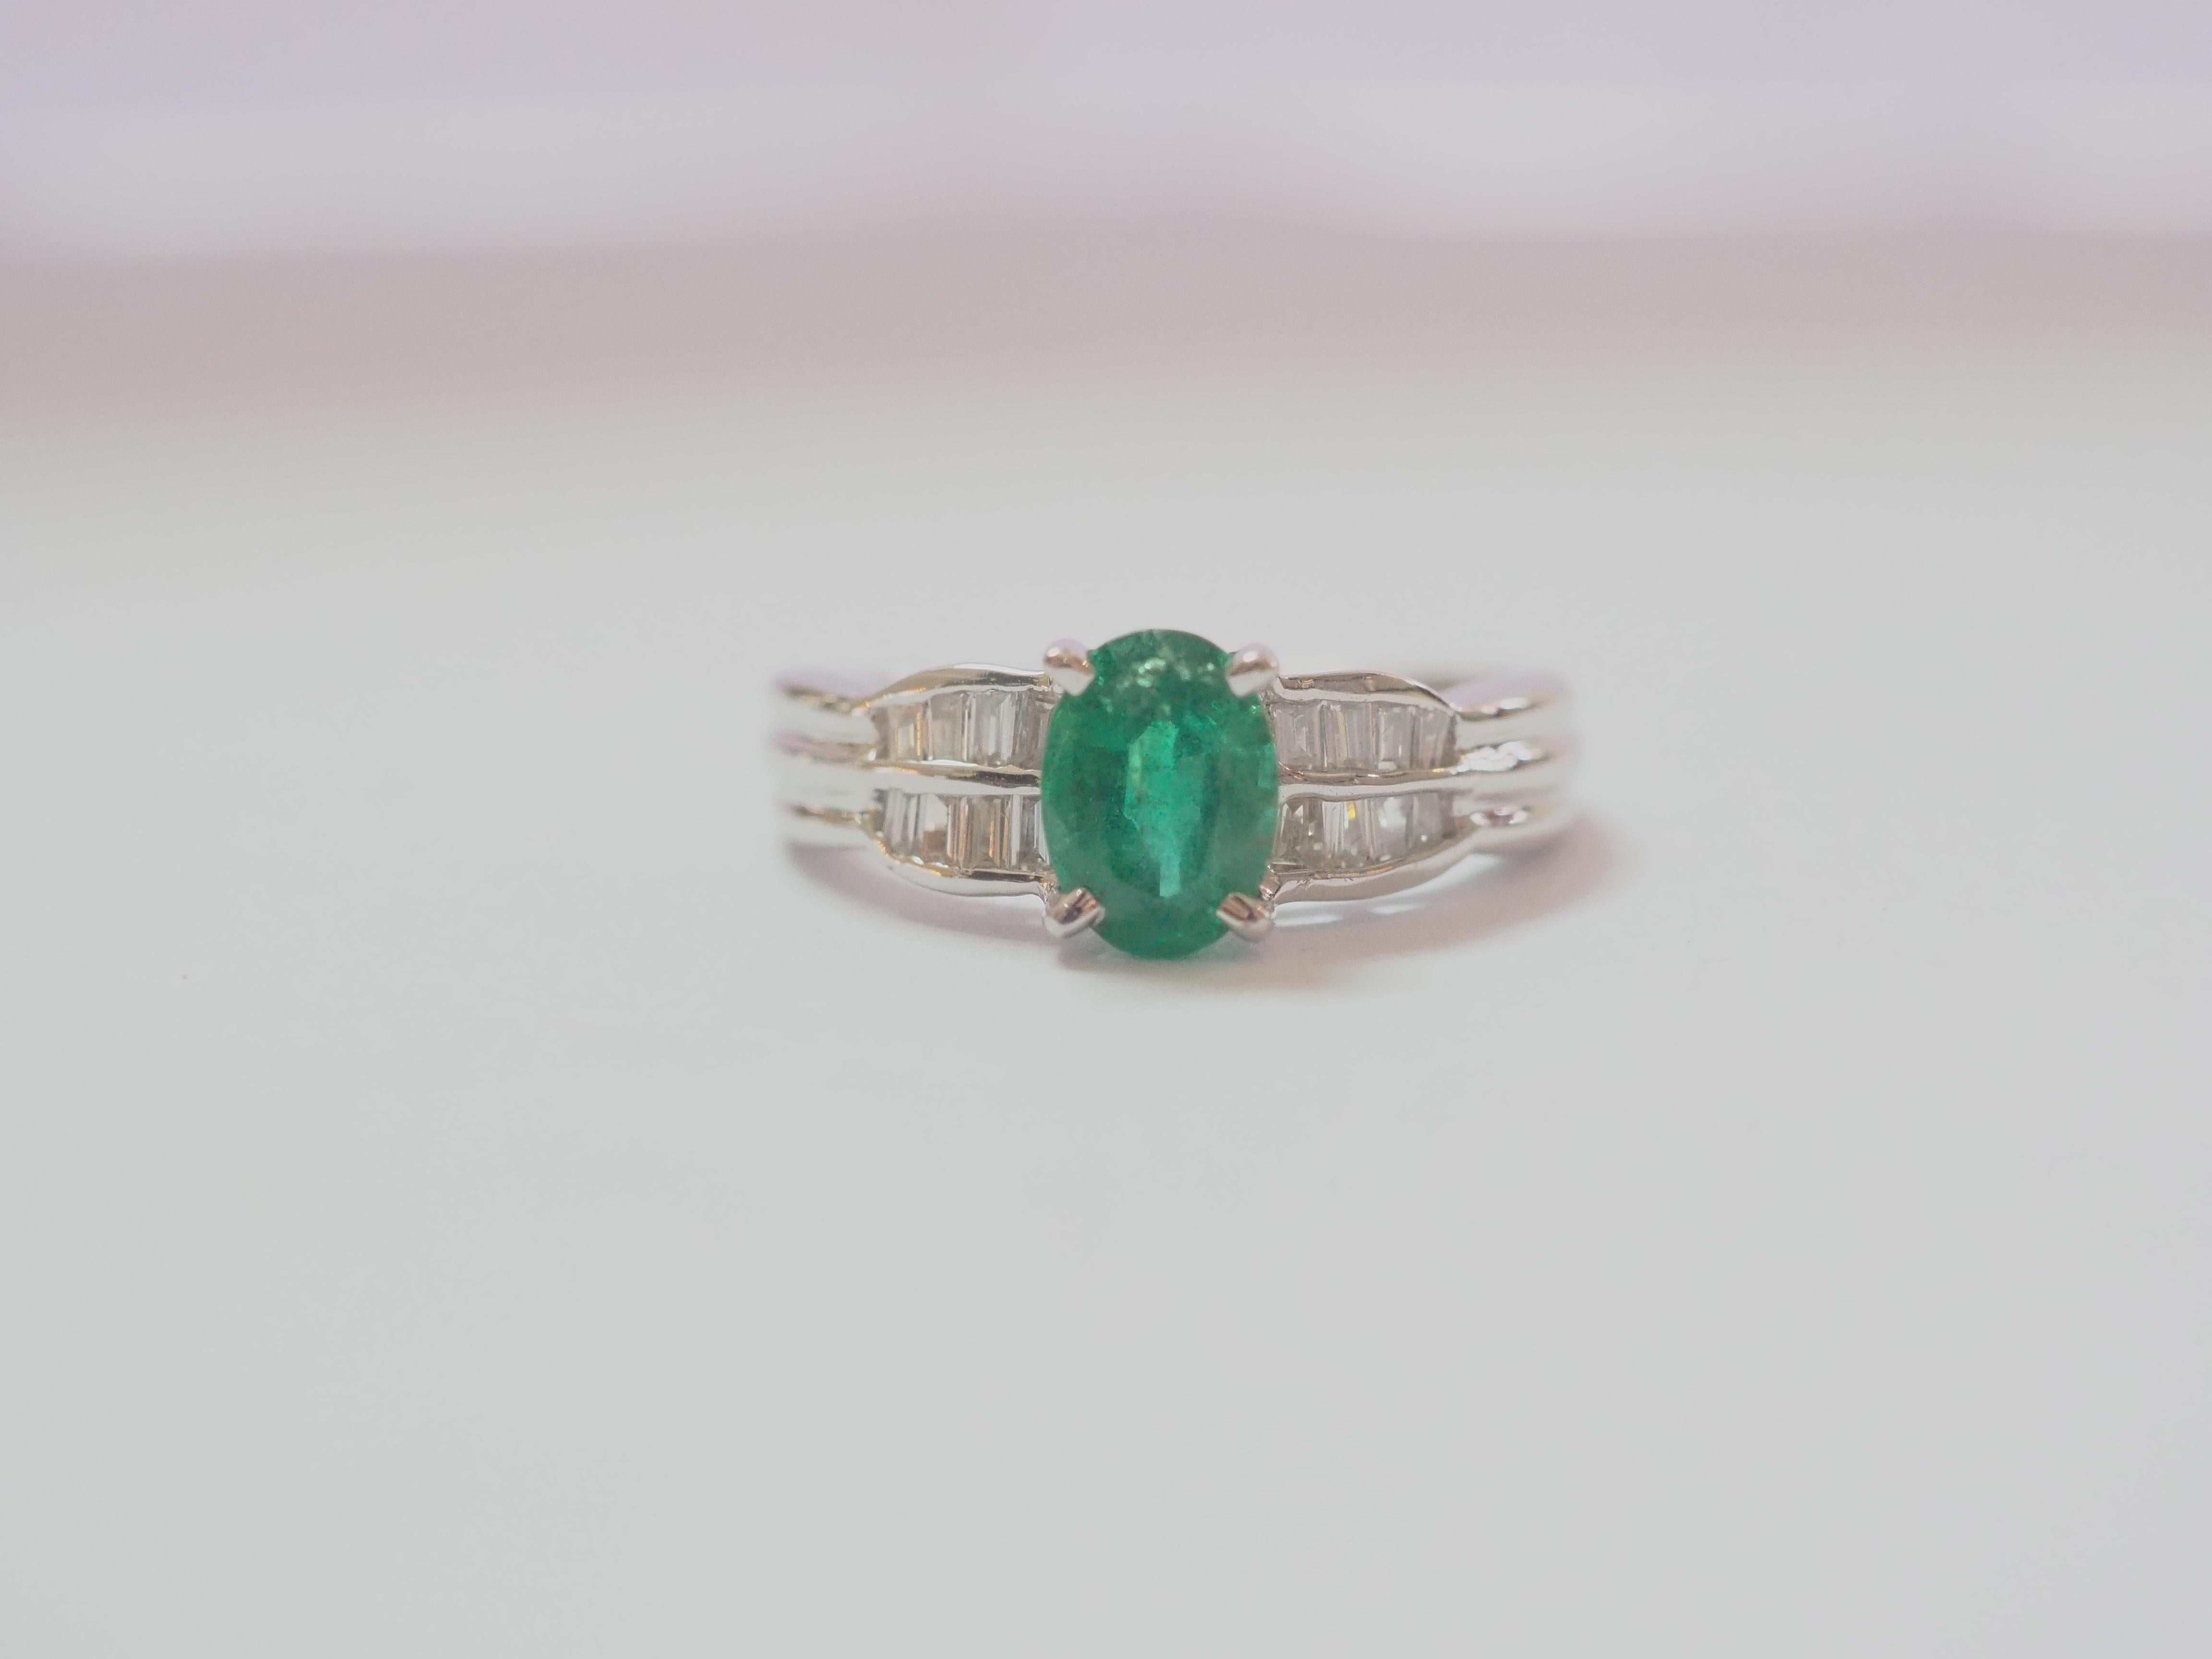  This engagement piece is a beautiful 18K white gold fine emerald and diamond ring! The piece is accompanied by ICA report card #150971 PIN: 04C3 on the wonderful vibrant emerald stating that this beautiful stone has only minor clarity enhancement